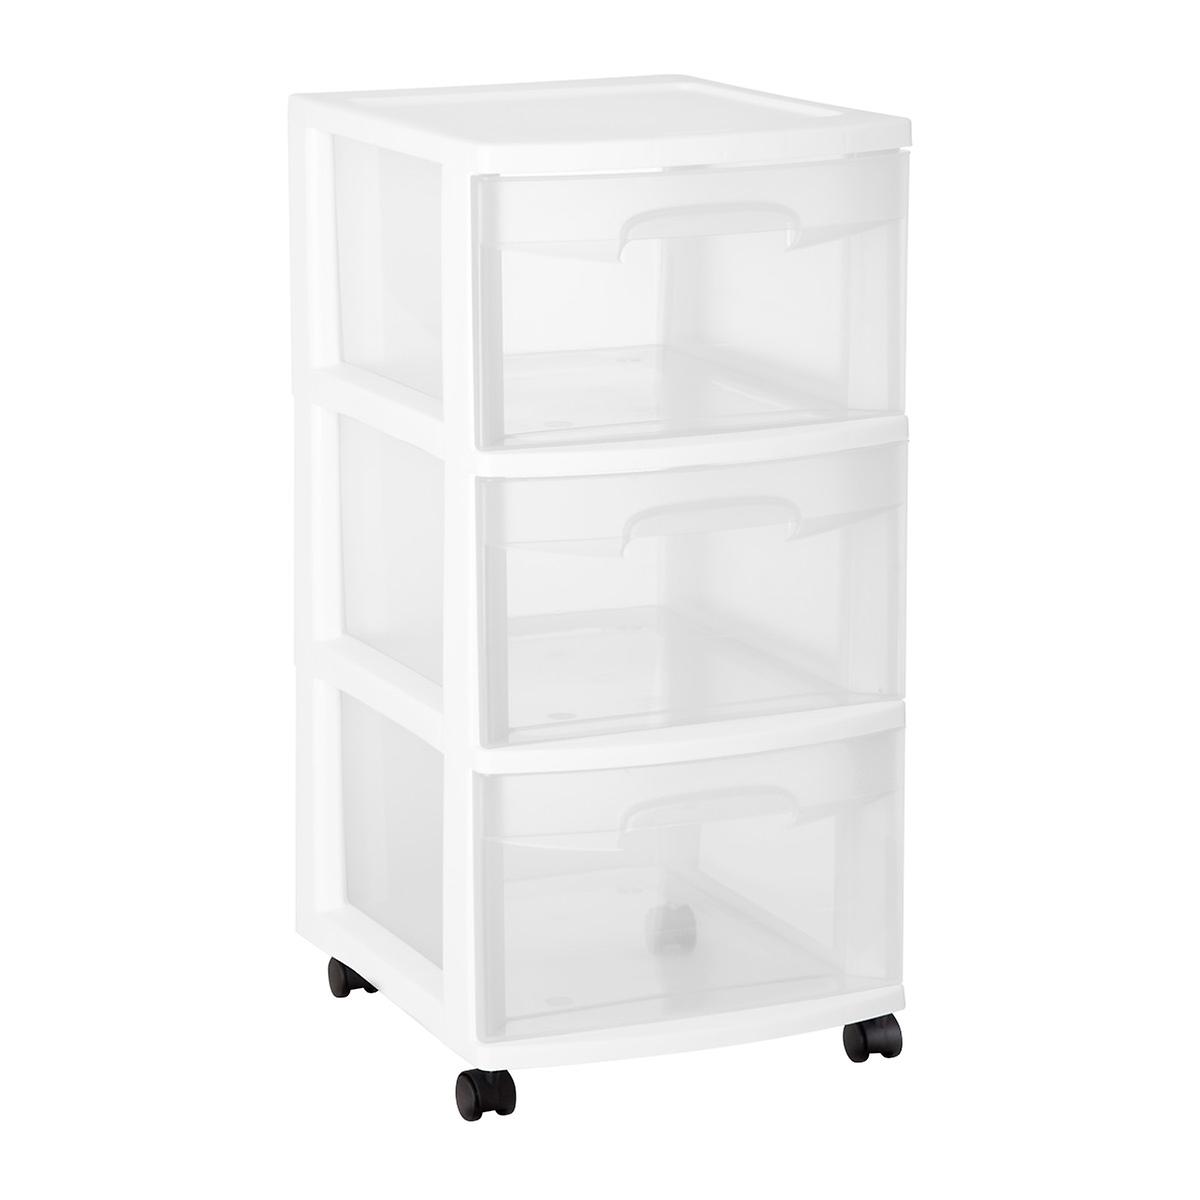 Sterilite 3-Drawer Chest with Wheels | The Container Store